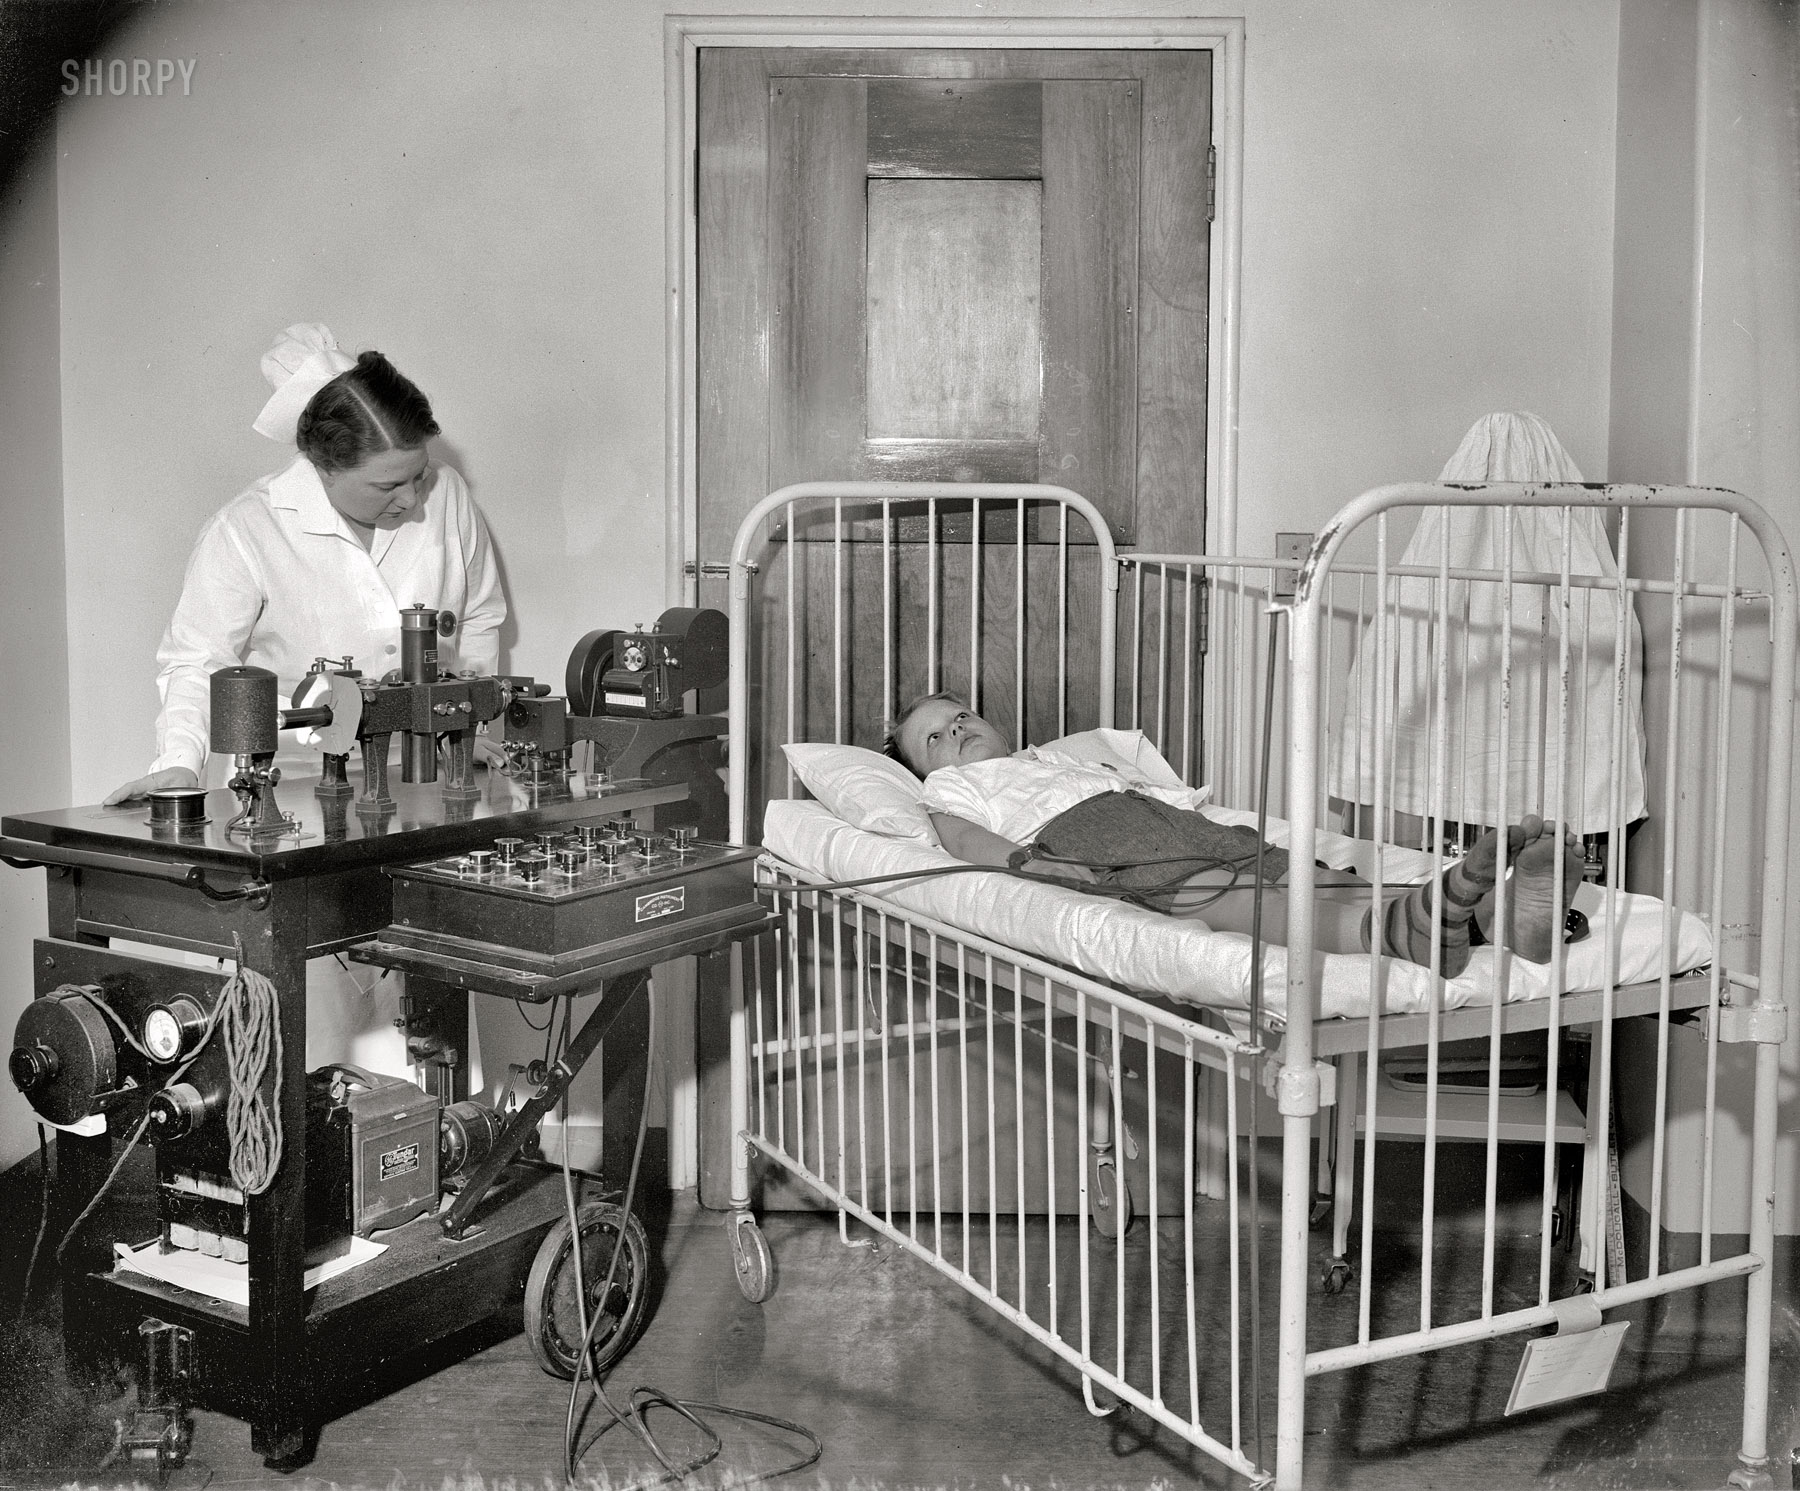 Washington, D.C., circa 1937. "Children's Hospital Rotary." Who can tell us what's going on here? Harris & Ewing Collection glass negative. View full size.